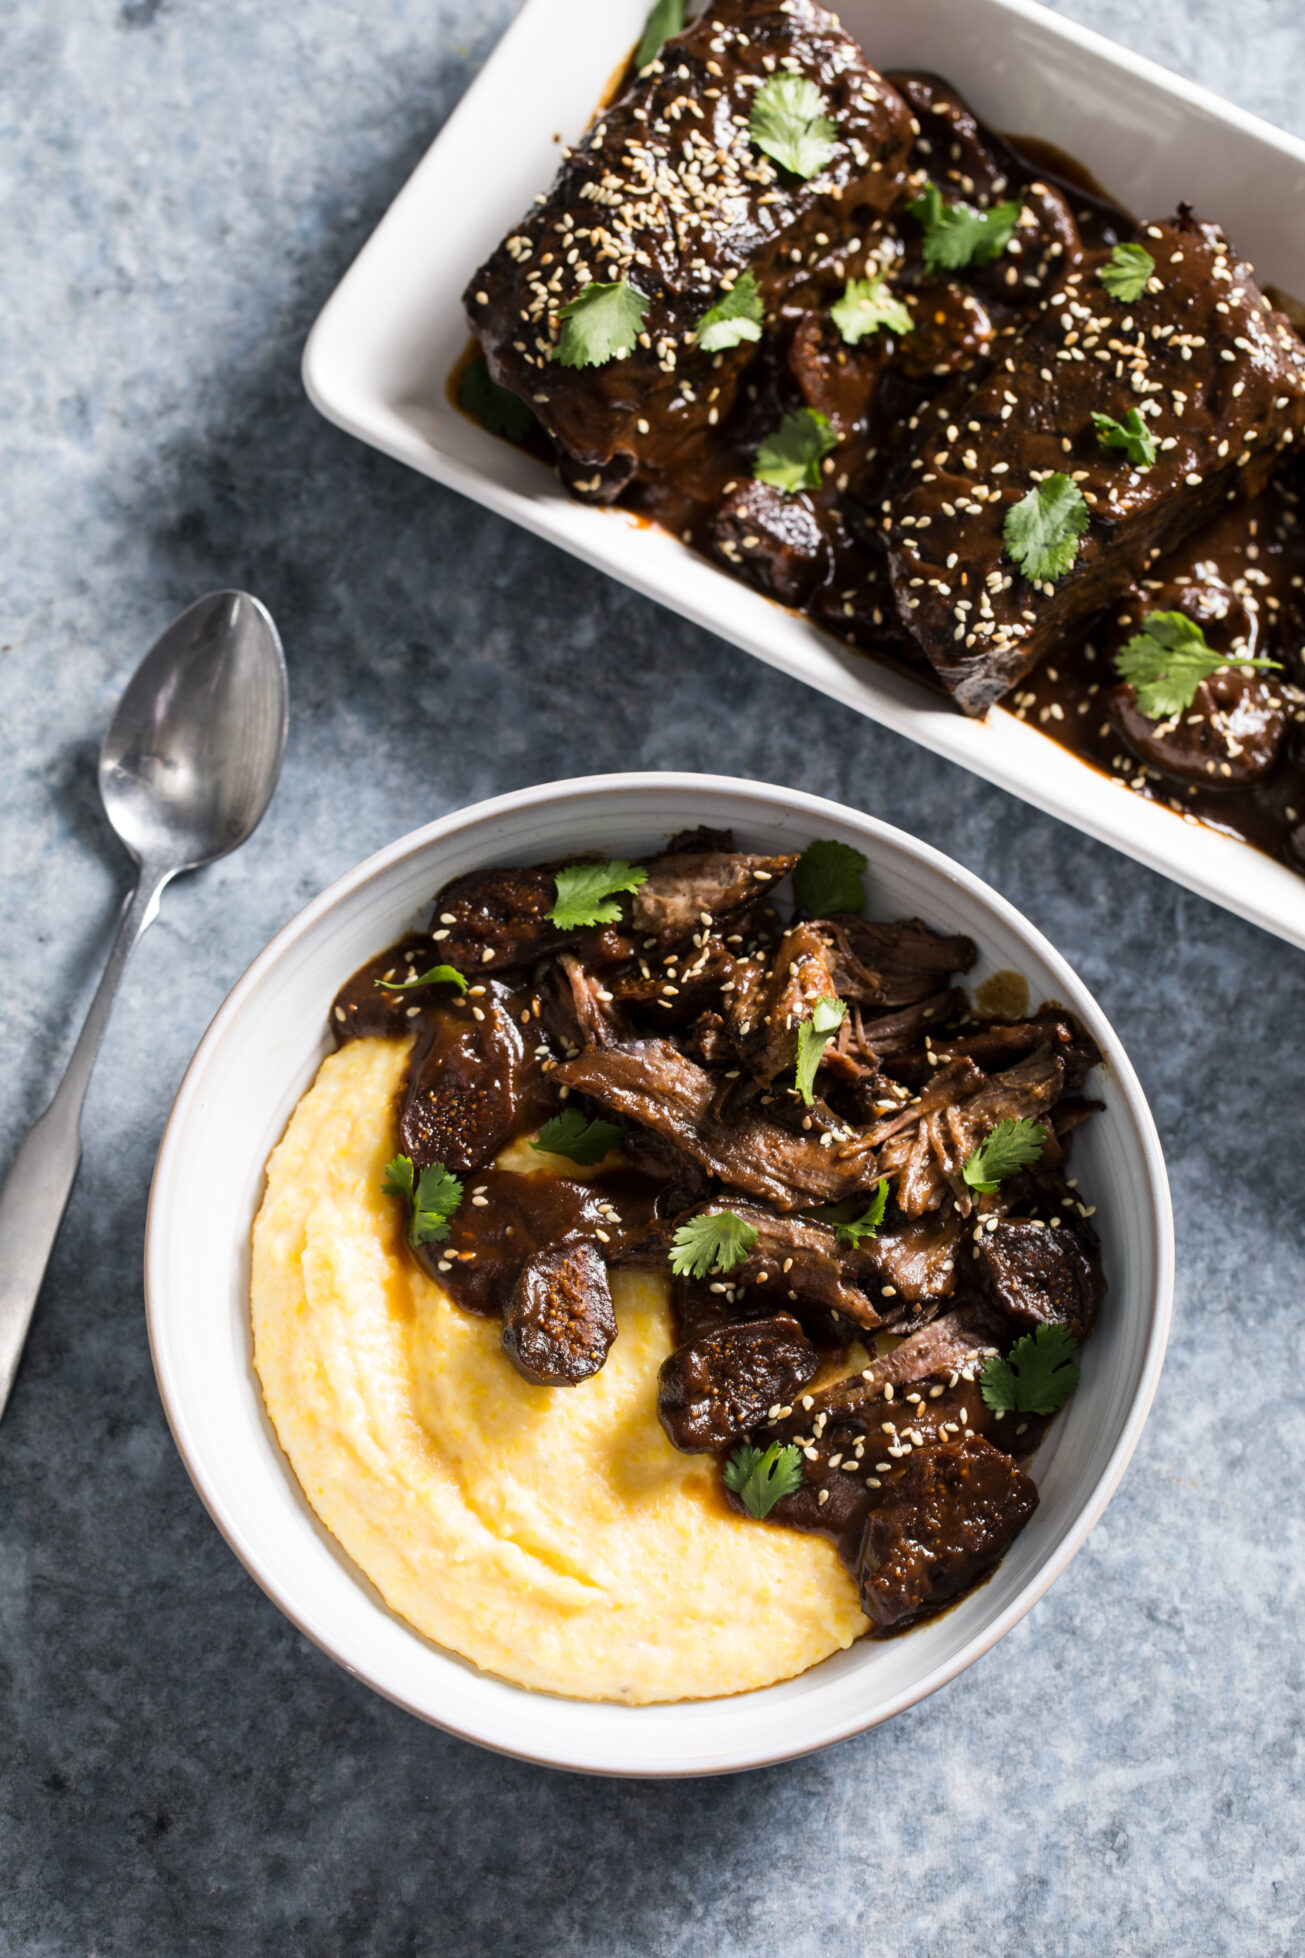 Bring the restaurant home in a tender pomegranate oven braised short rib recipe. Mediterranean spices and figs add nuance to the recipe for braised beef short ribs.